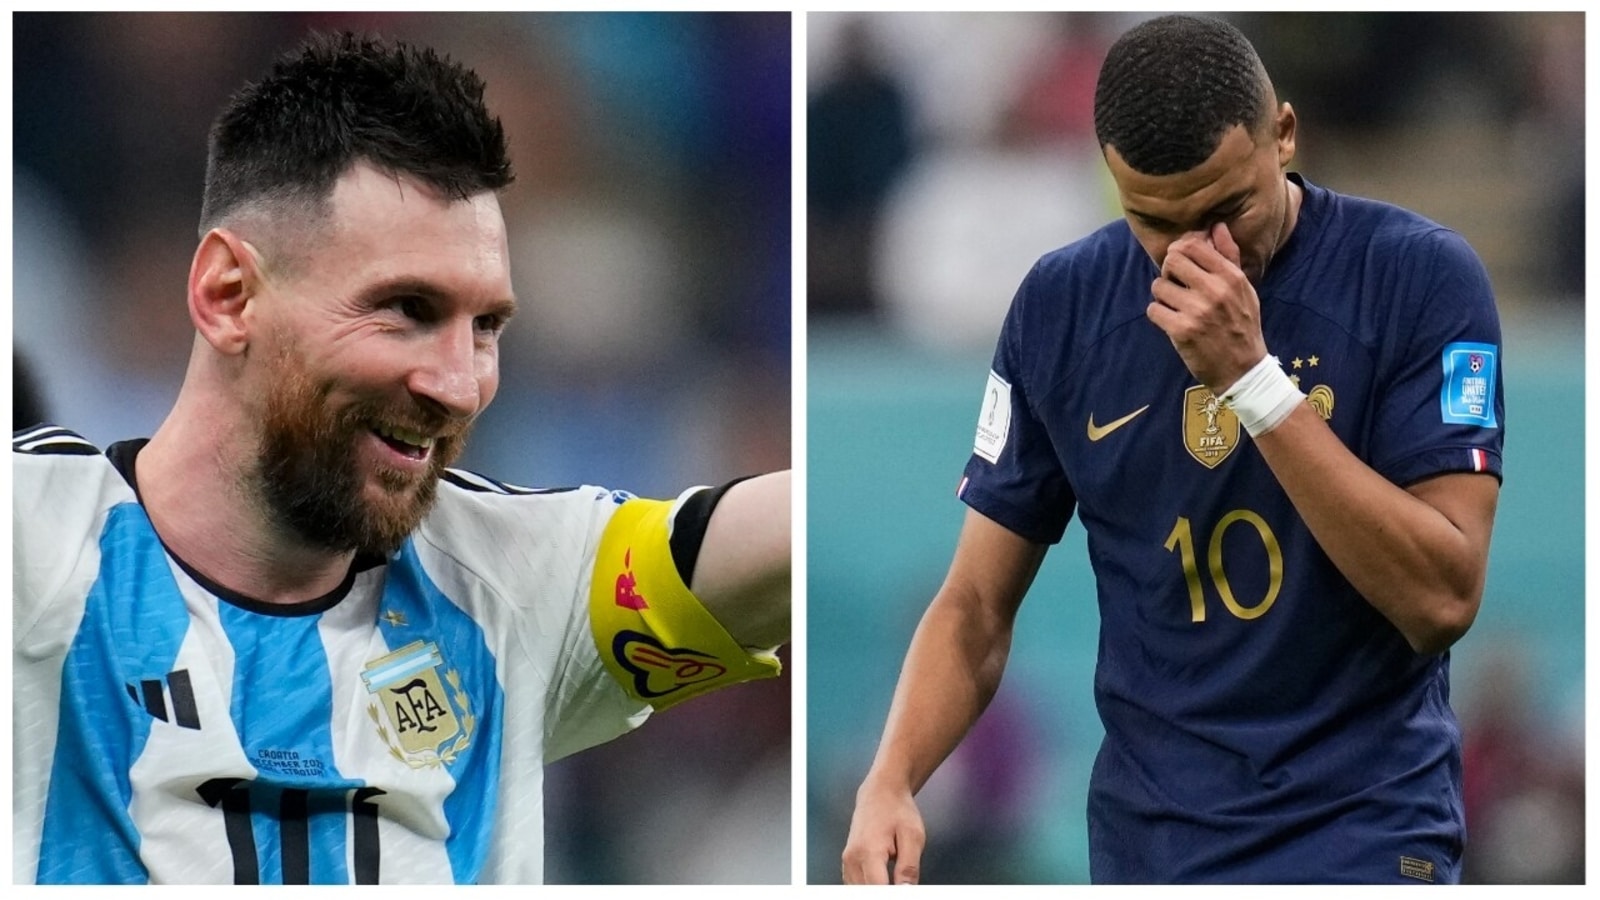 Explained: Who will win Golden Boot if both Messi and Mbappe end up scoring same number of goals at FIFA World Cup 2022?